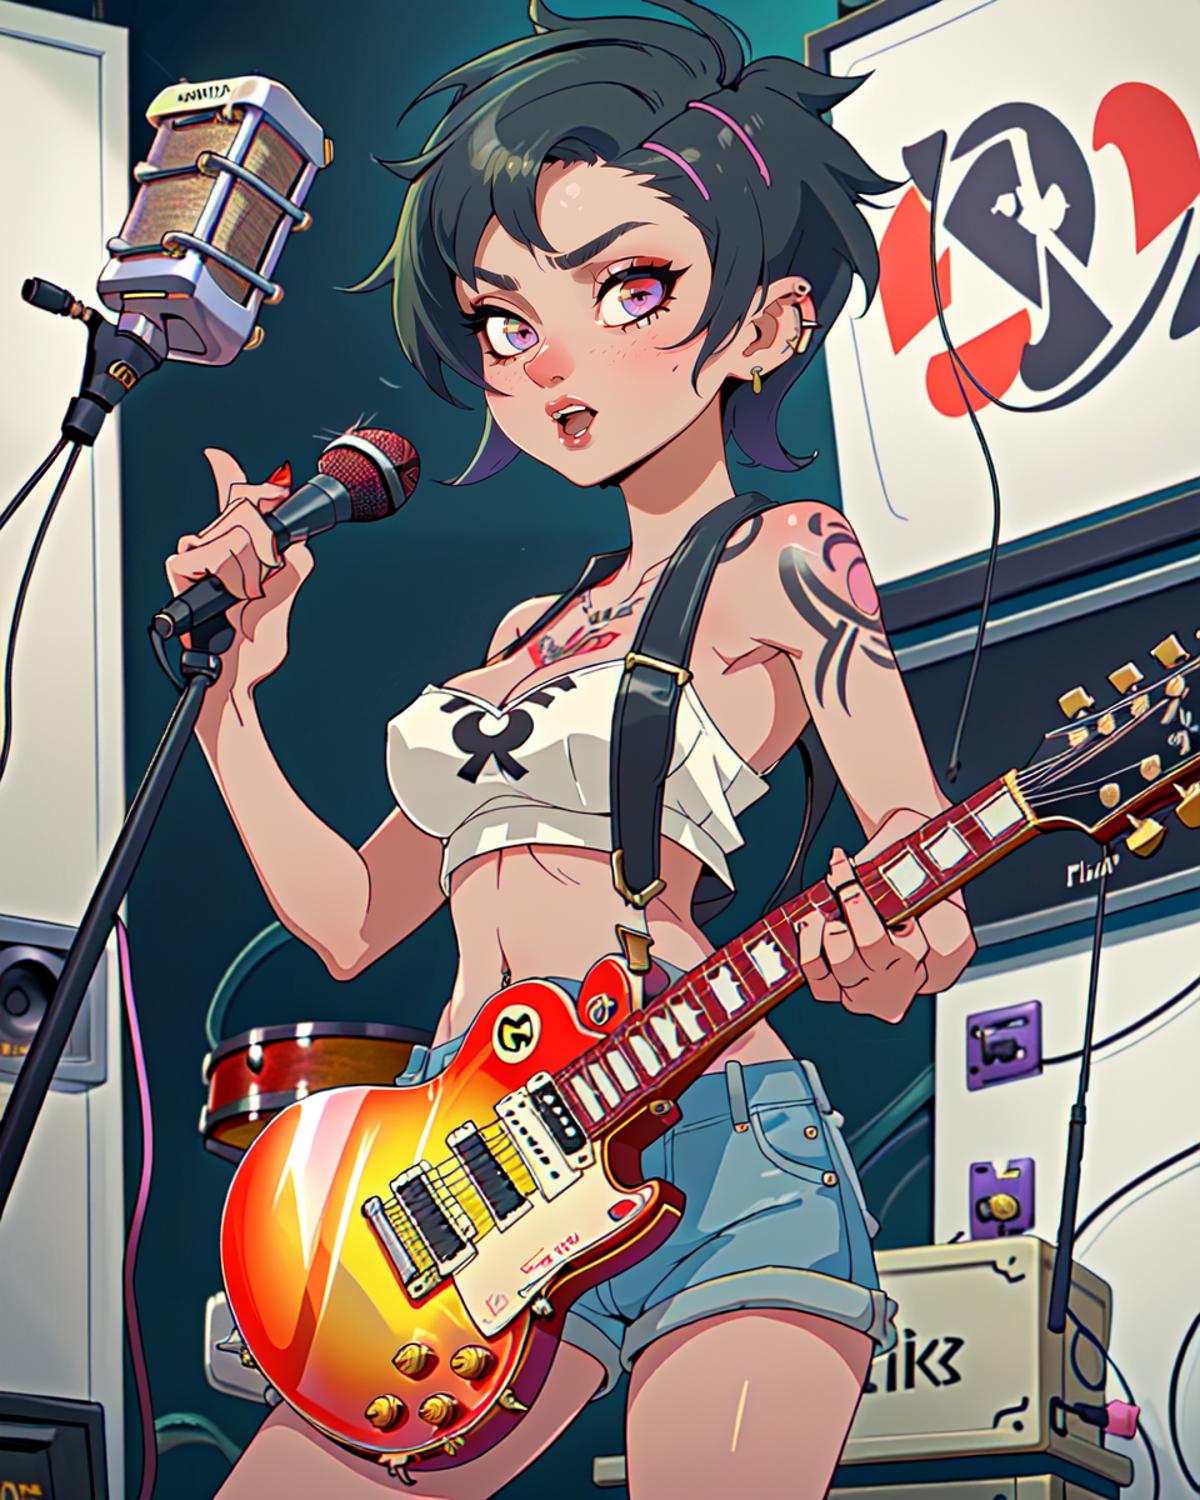 A cartoon illustration of a girl playing a guitar with a microphone.